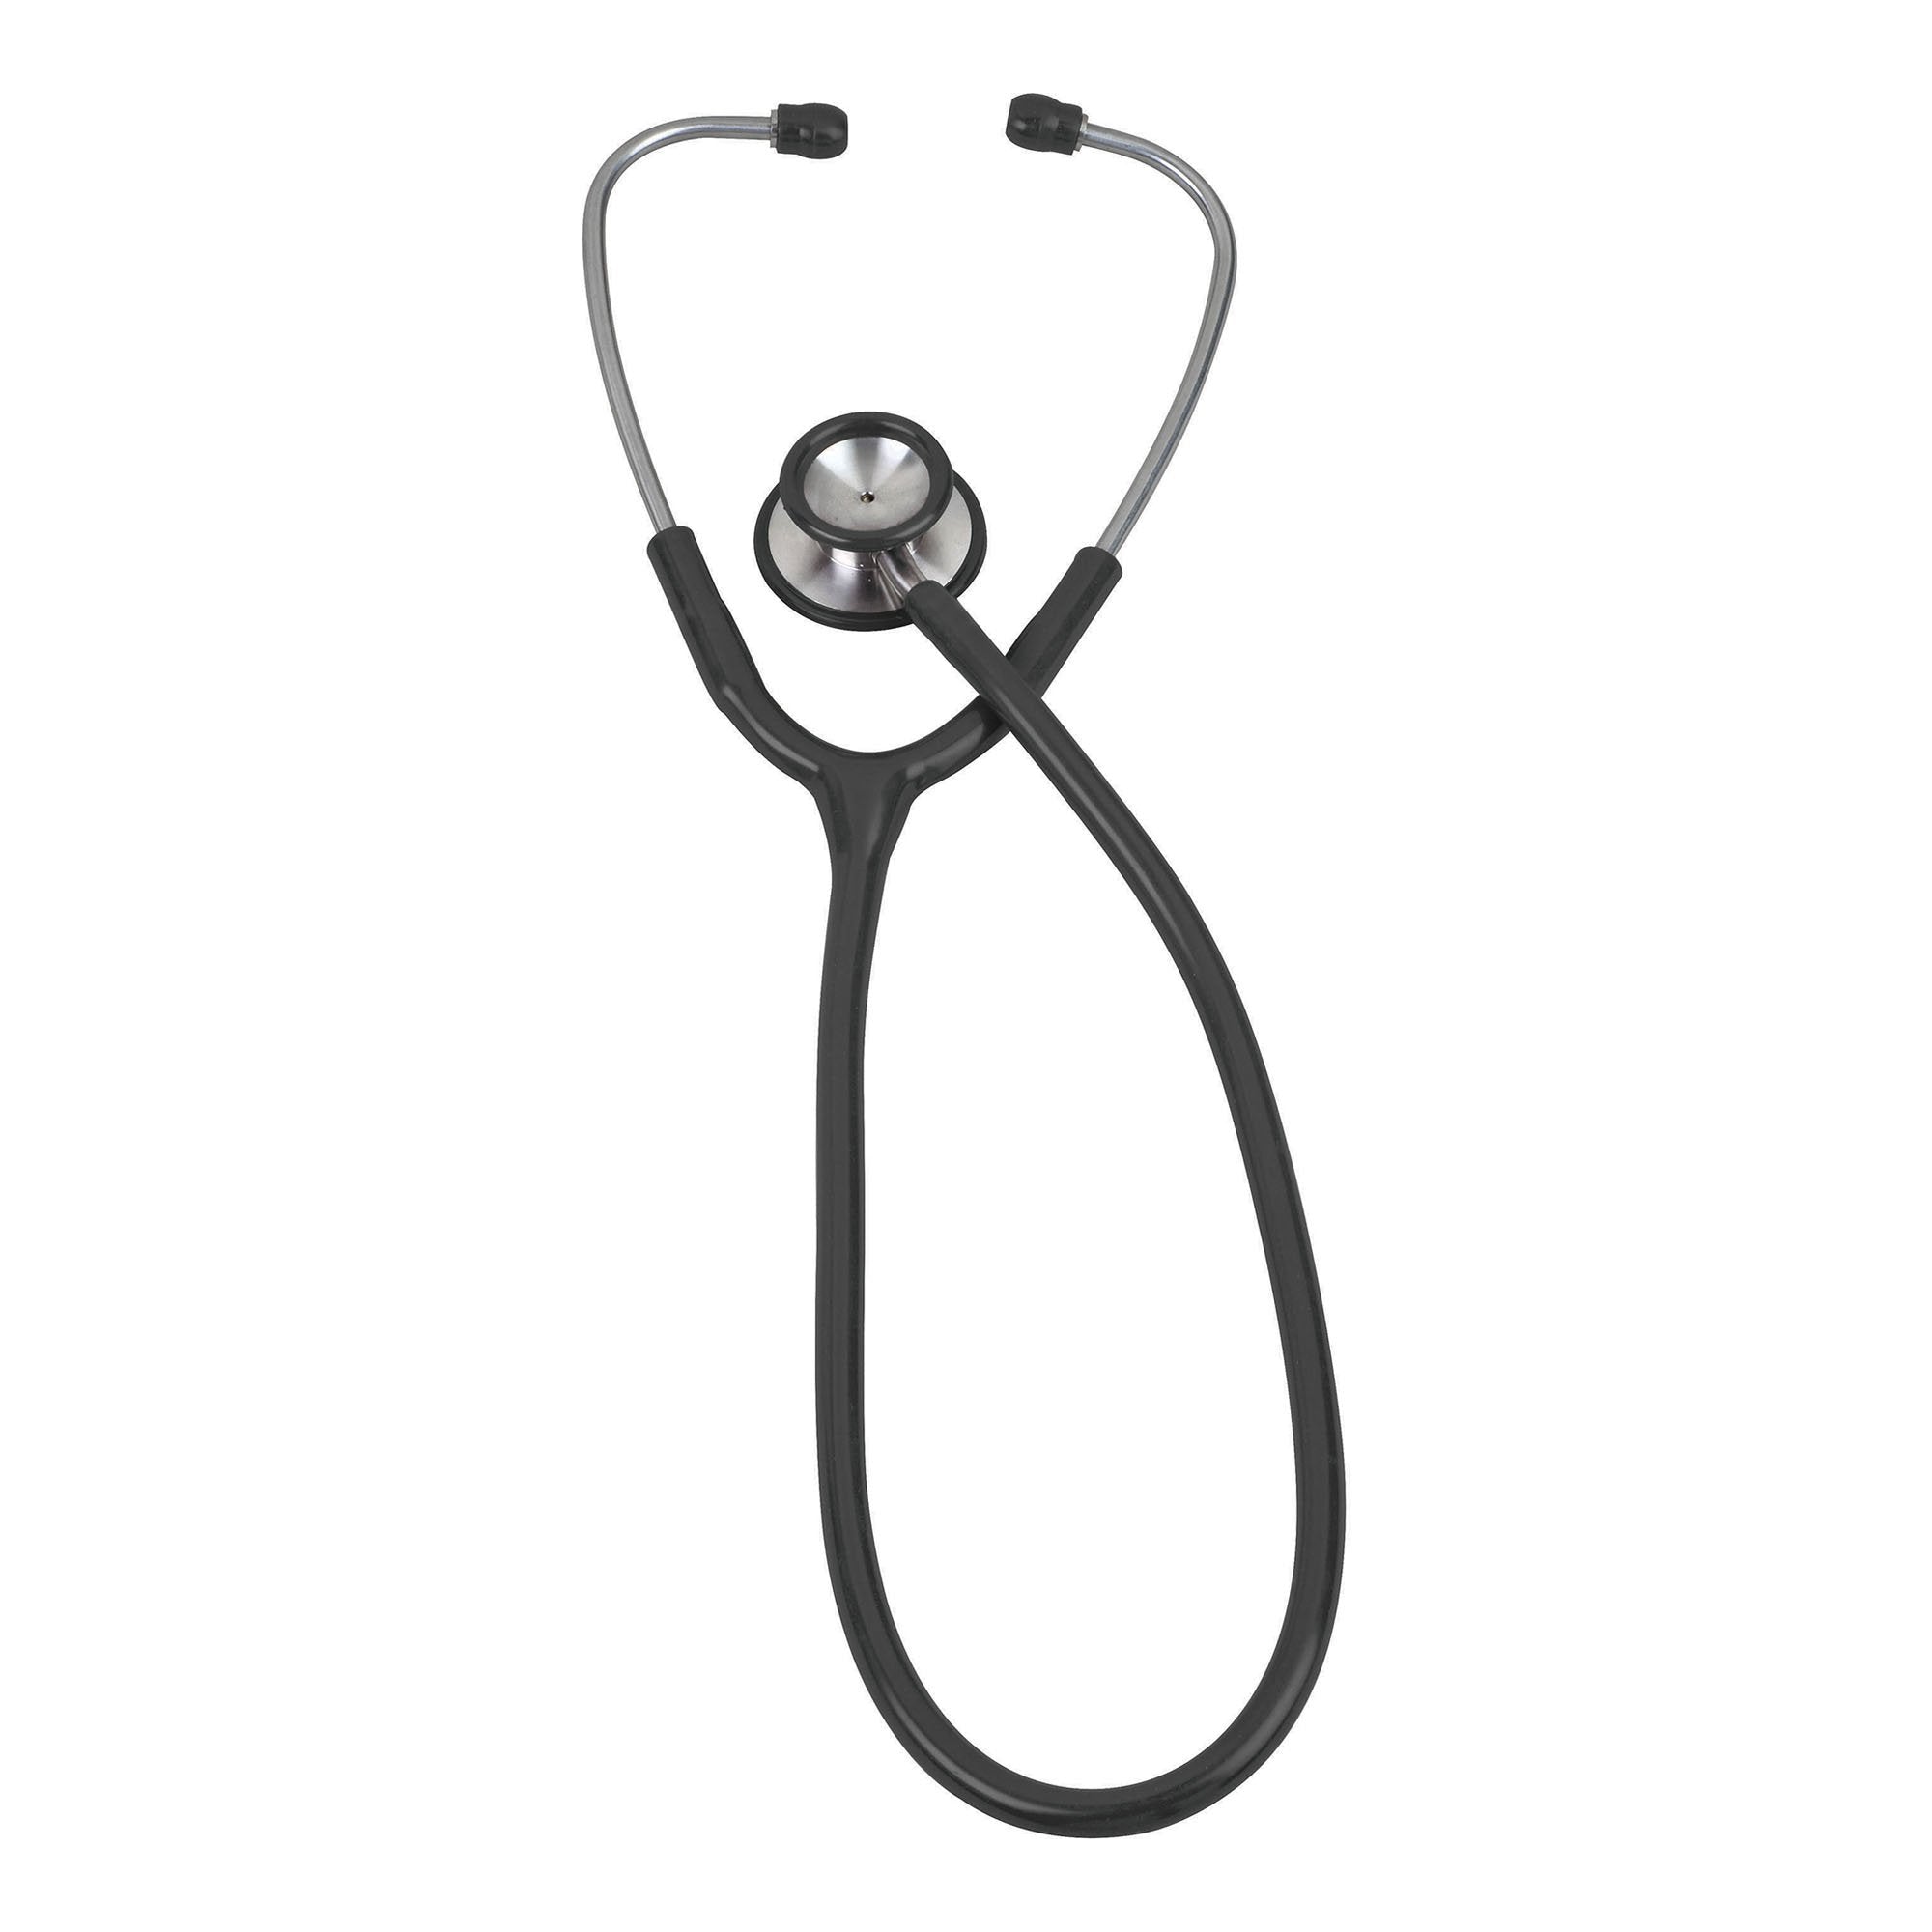 Classic Stethoscope Veridian Black 1-Tube 25 Inch Tube Double-Sided Chestpiece